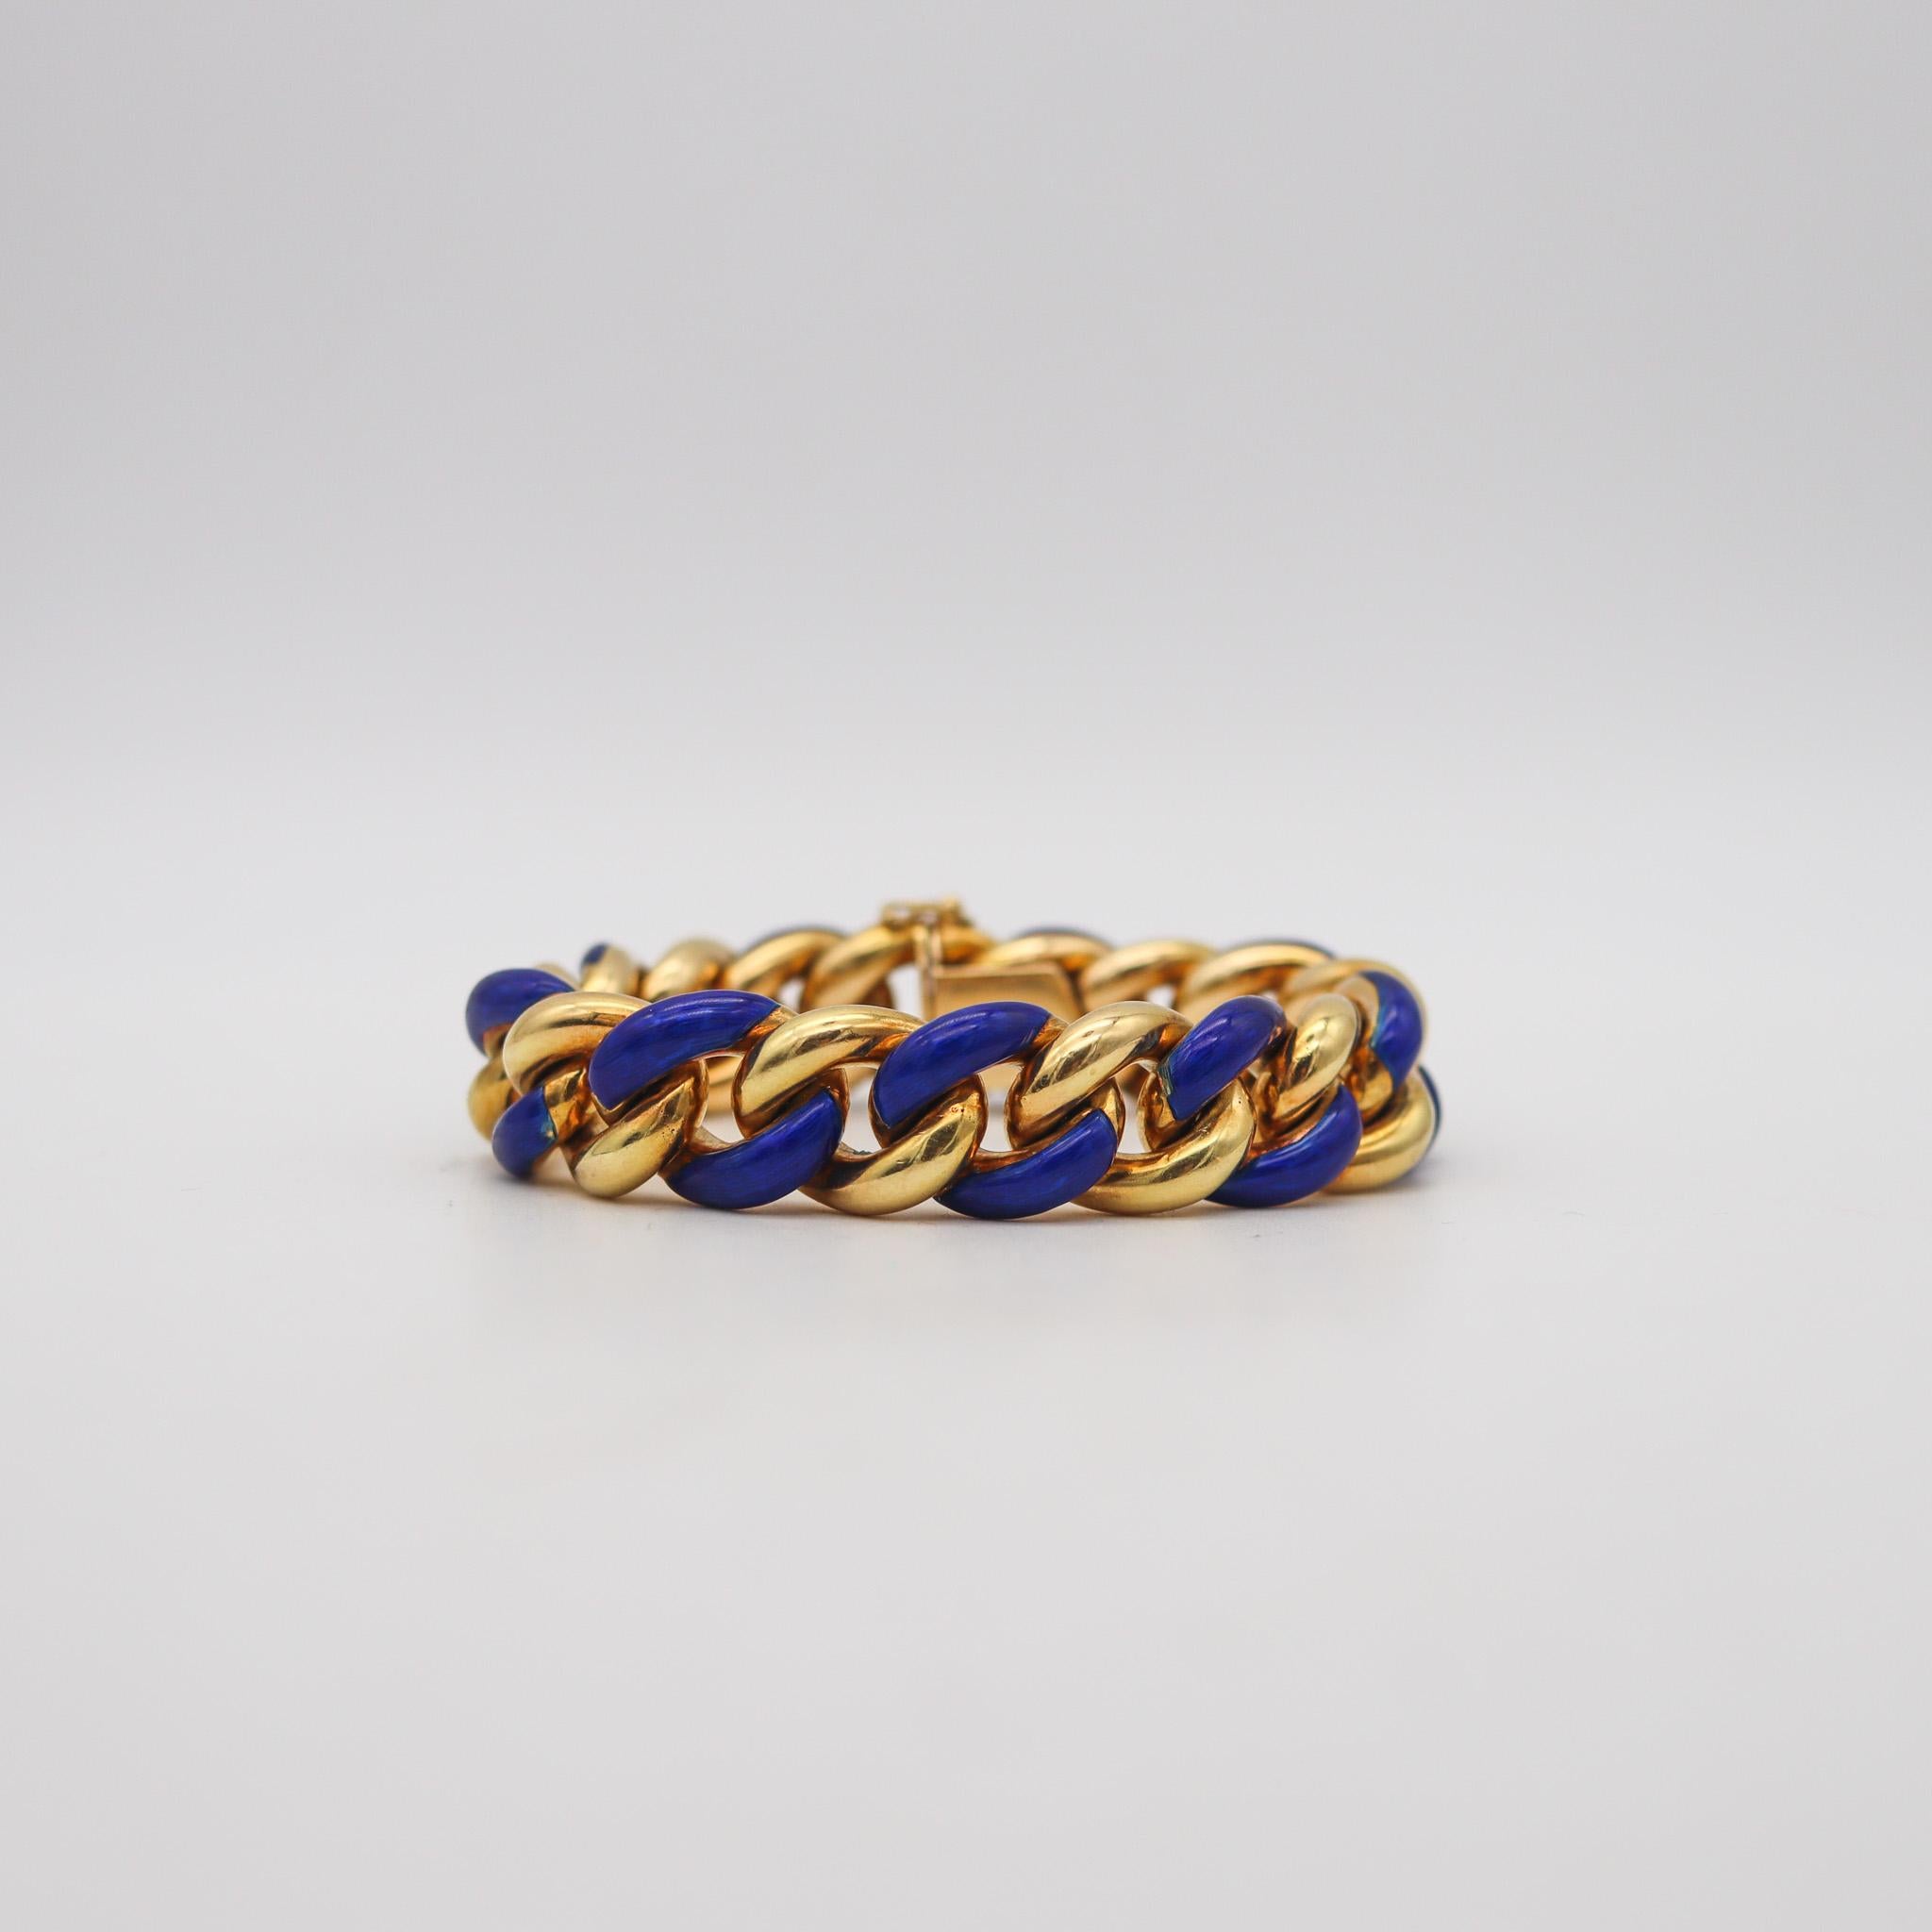 Enameled bracelet designed by Gay Freres.

Gorgeous statement bracelet, created in Paris France during the modernist period, back in the 1970. This terrific links bracelet was crafted at the jewelry atelier of Gay Freres in solid yellow gold of 18